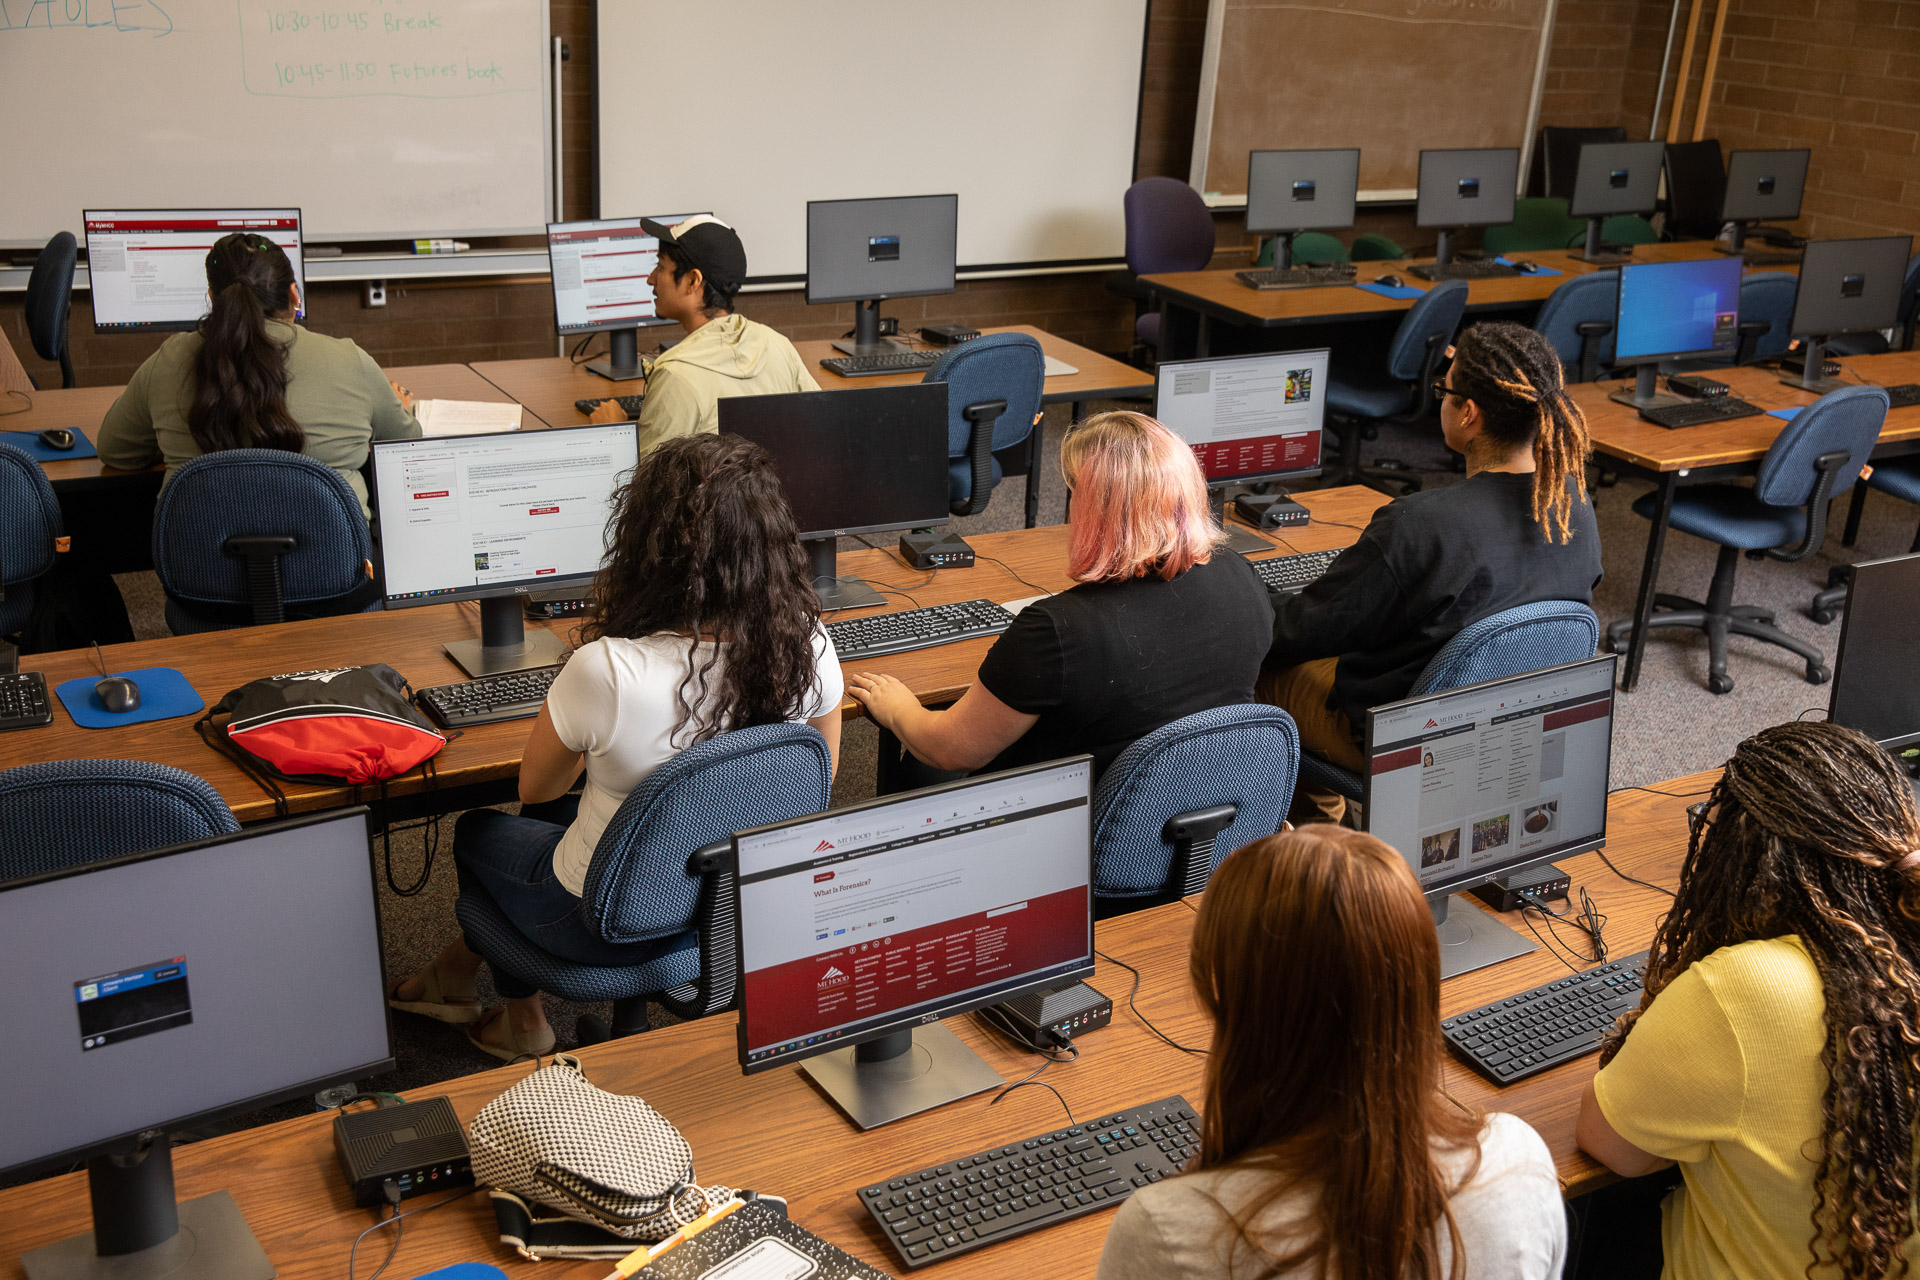 Students in a classroom at computers